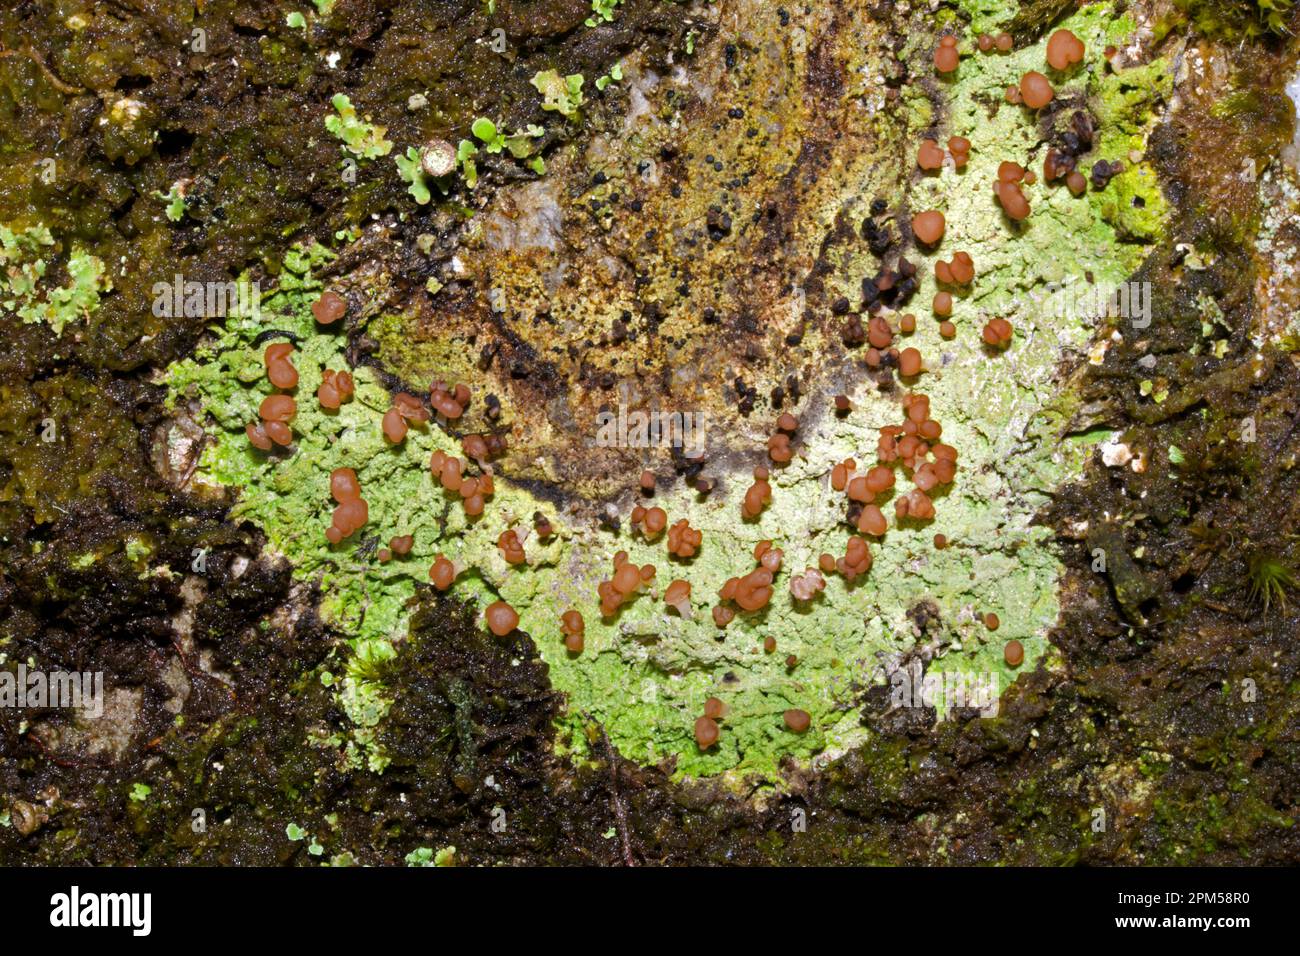 Baeomyces rufus (brown beret lichen) is a crustose lichen that can grow on soil, leaf litter, tree bark or stones. It has a circumpolar distribution. Stock Photo